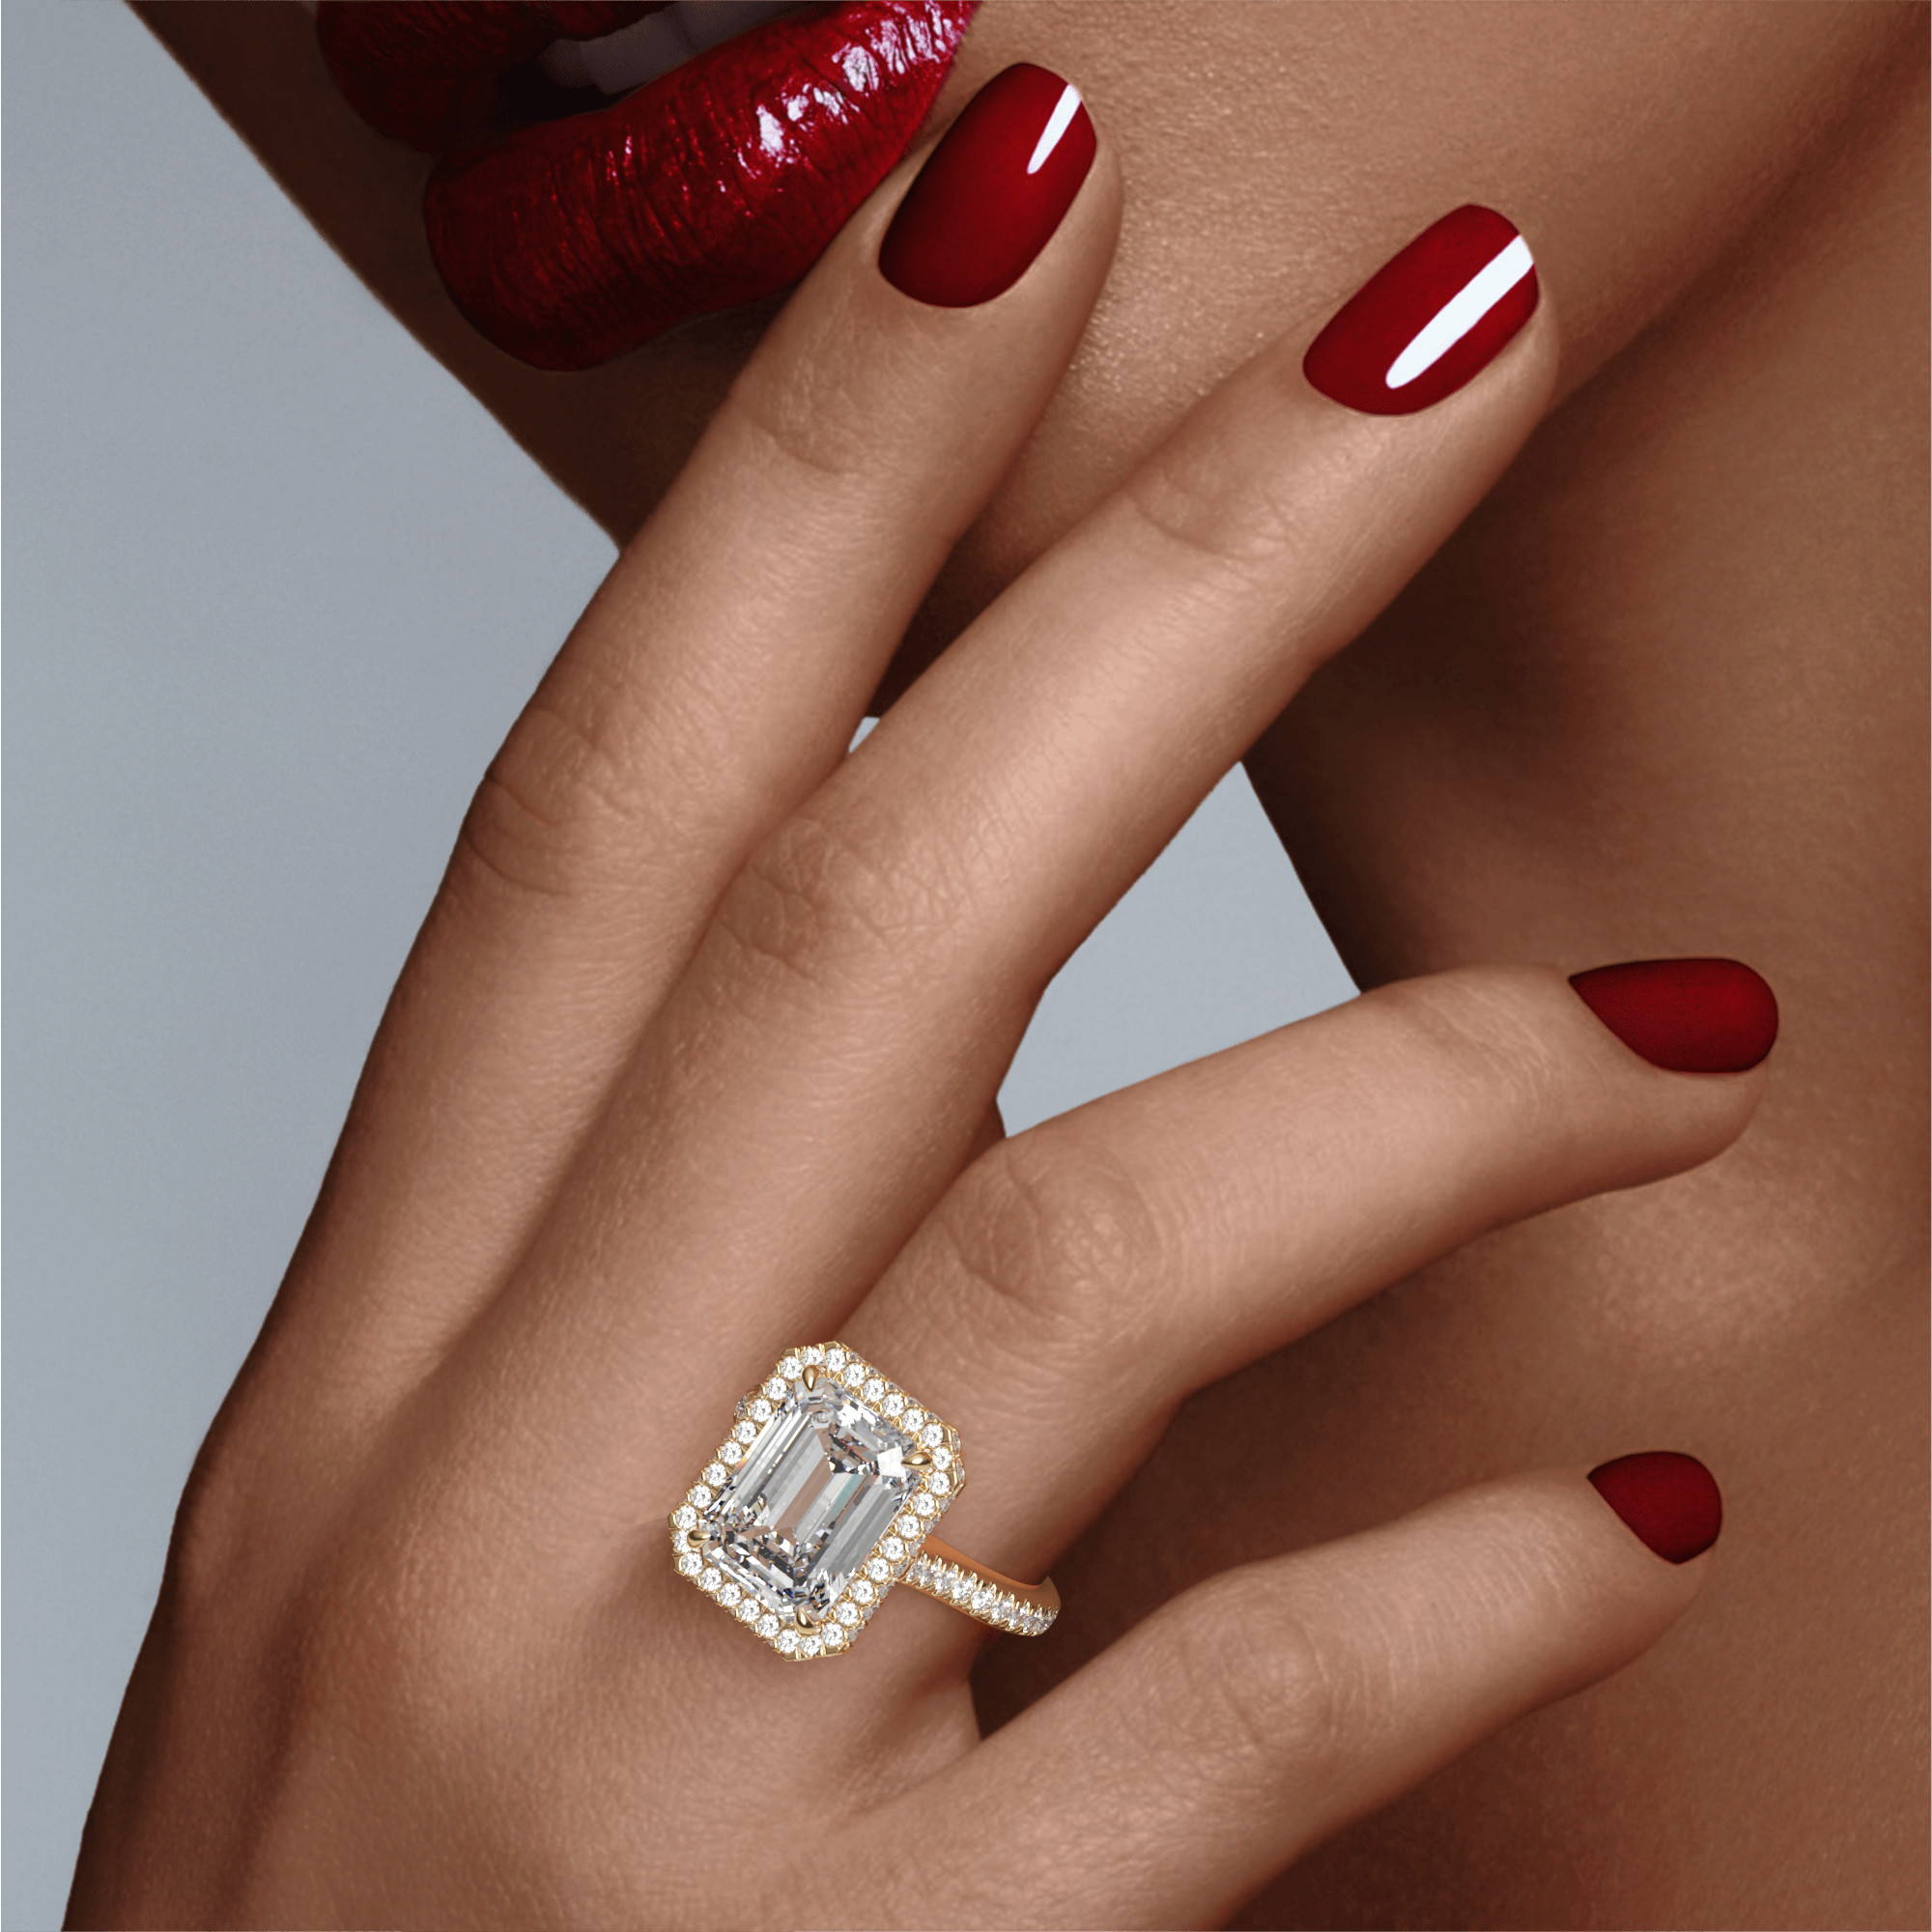 emerald cut halo engagement ring on hand